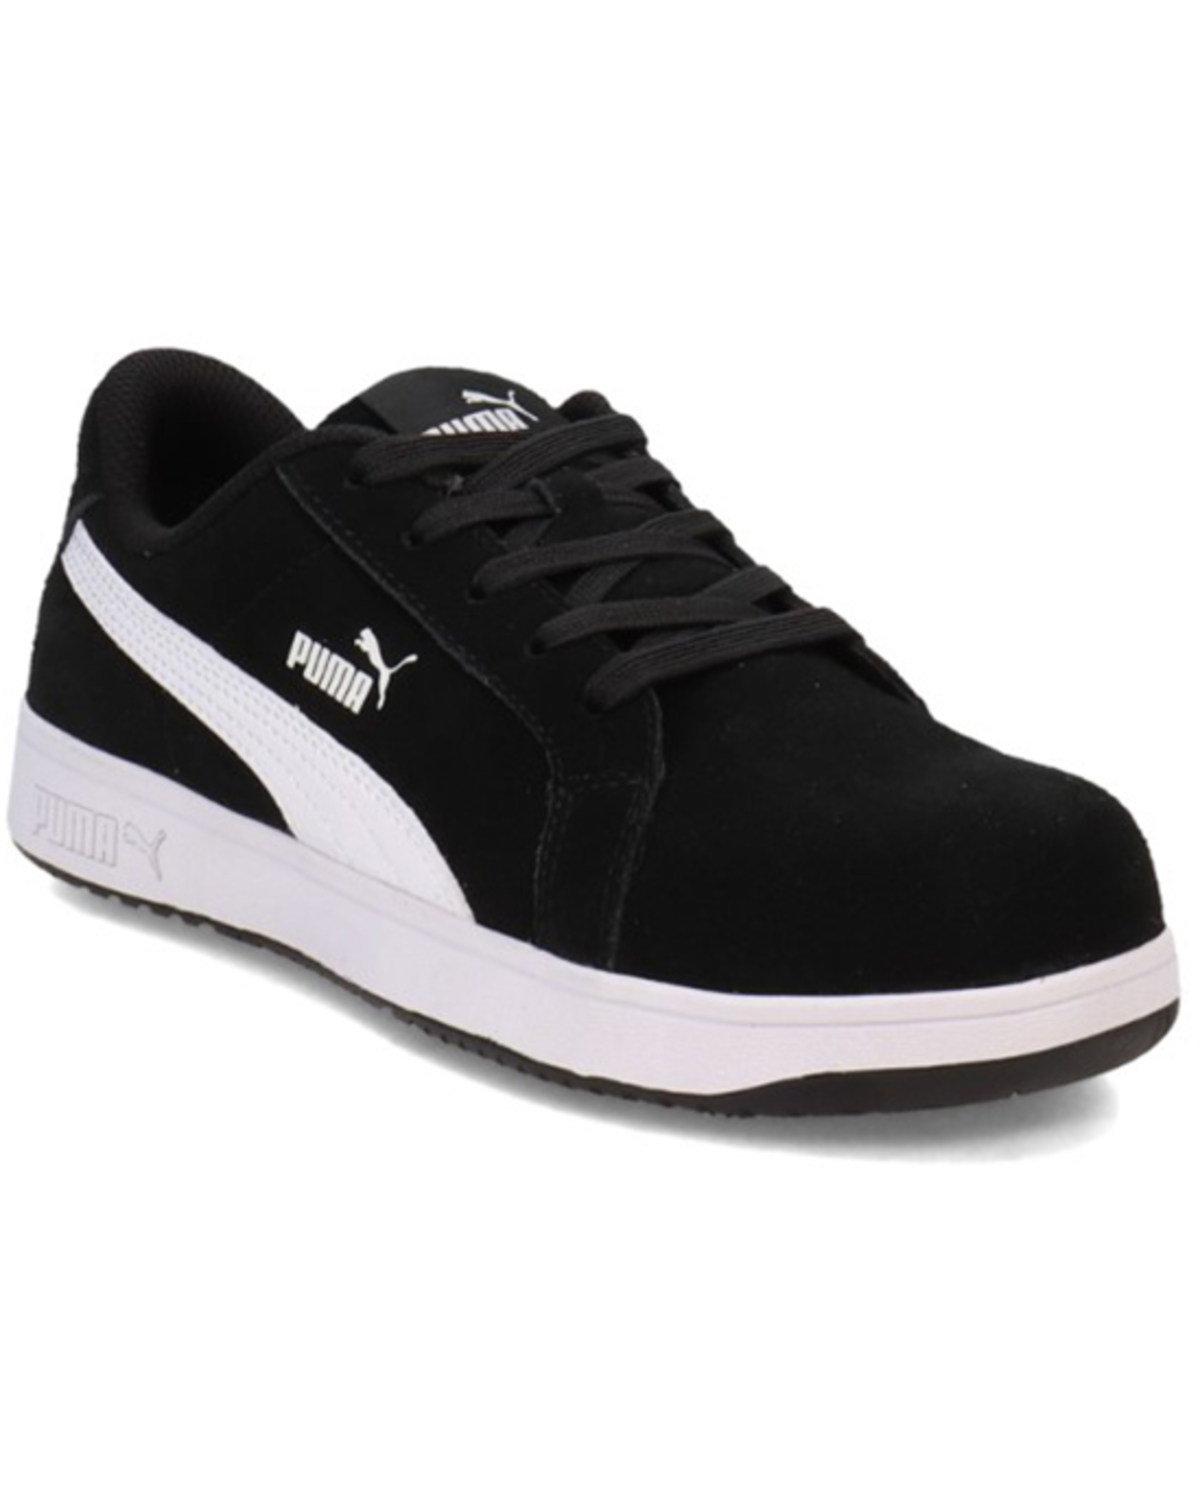 Puma Safety Women's Icon Work Shoes - Composite Toe